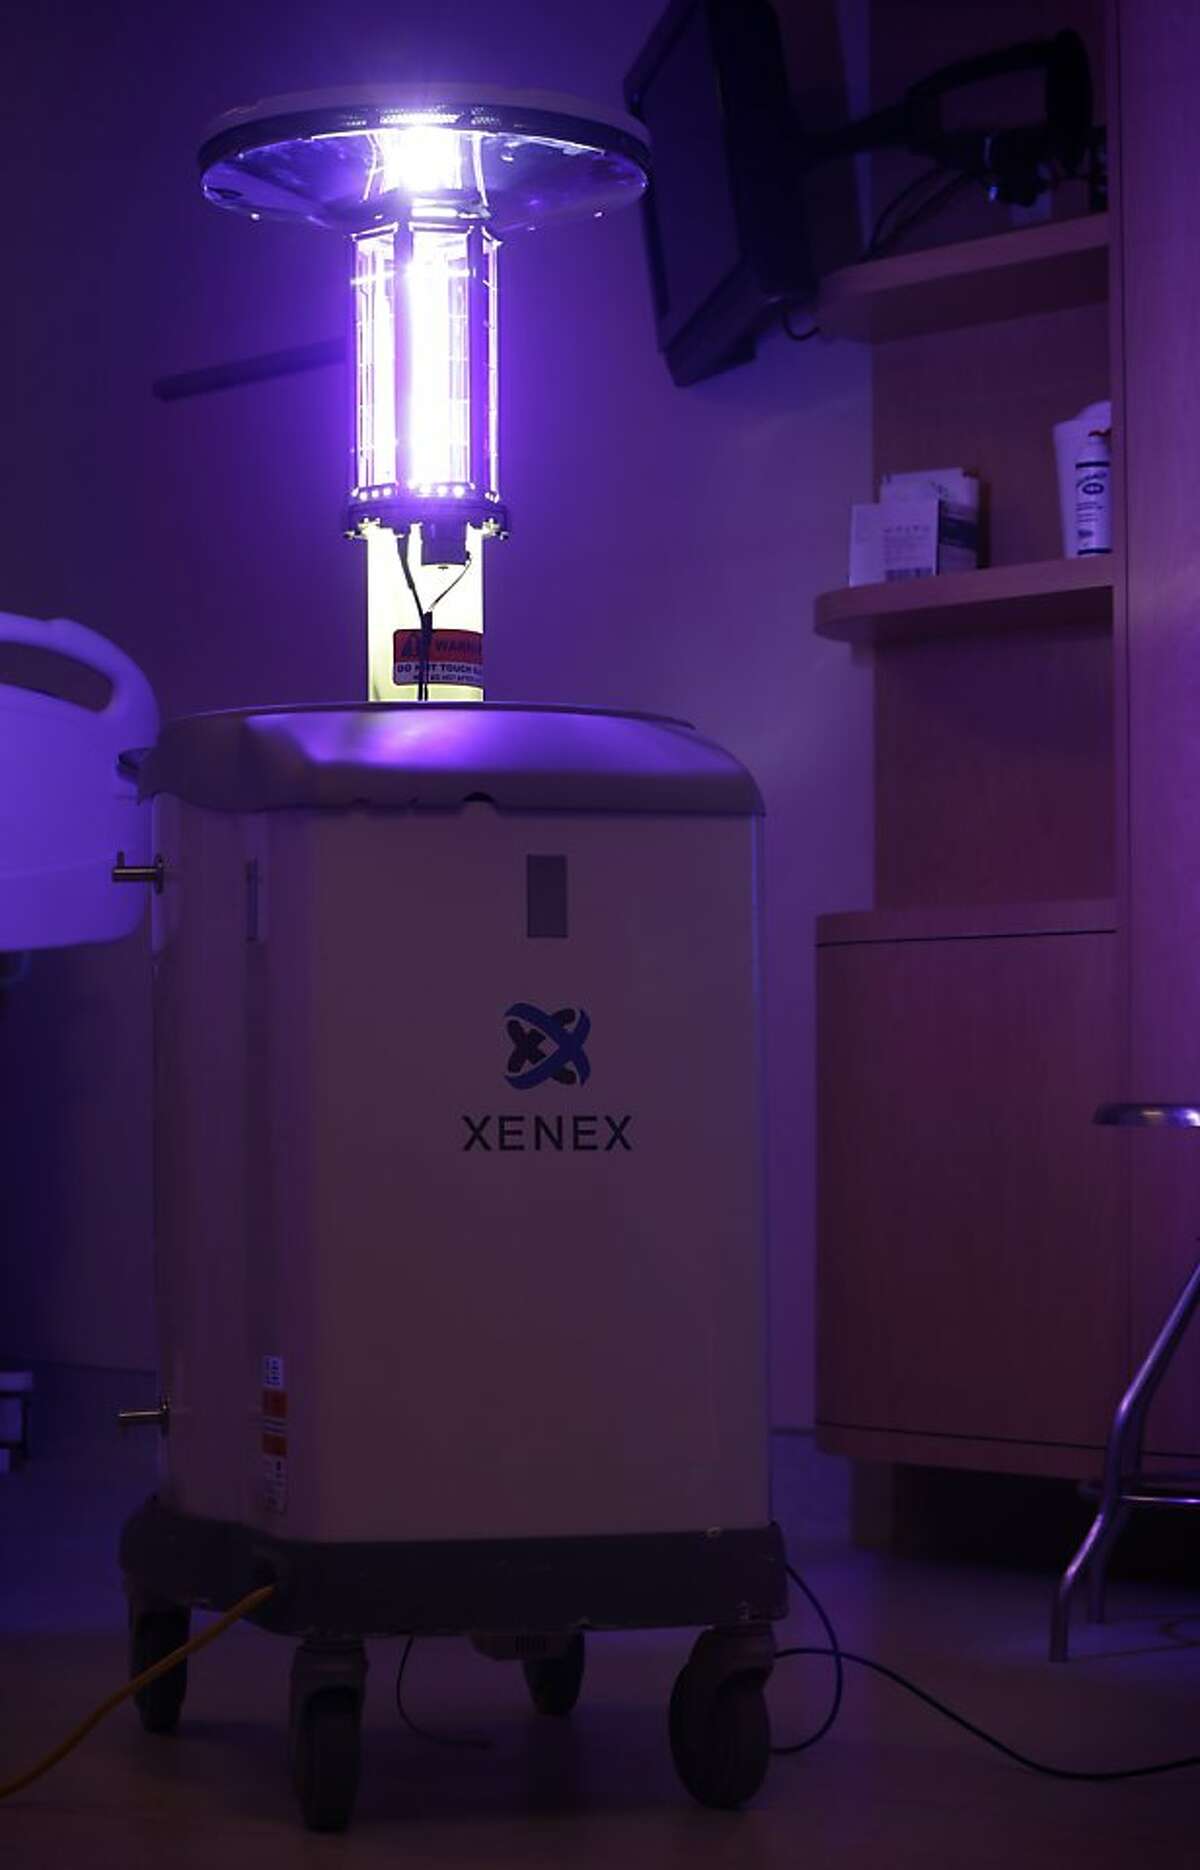 Using ultraviolet light, a machine disinfects a hospital room at the Westchester Medical Center in Valhalla, N.Y., Wednesday, March 20, 2013. (AP Photo/Seth Wenig)